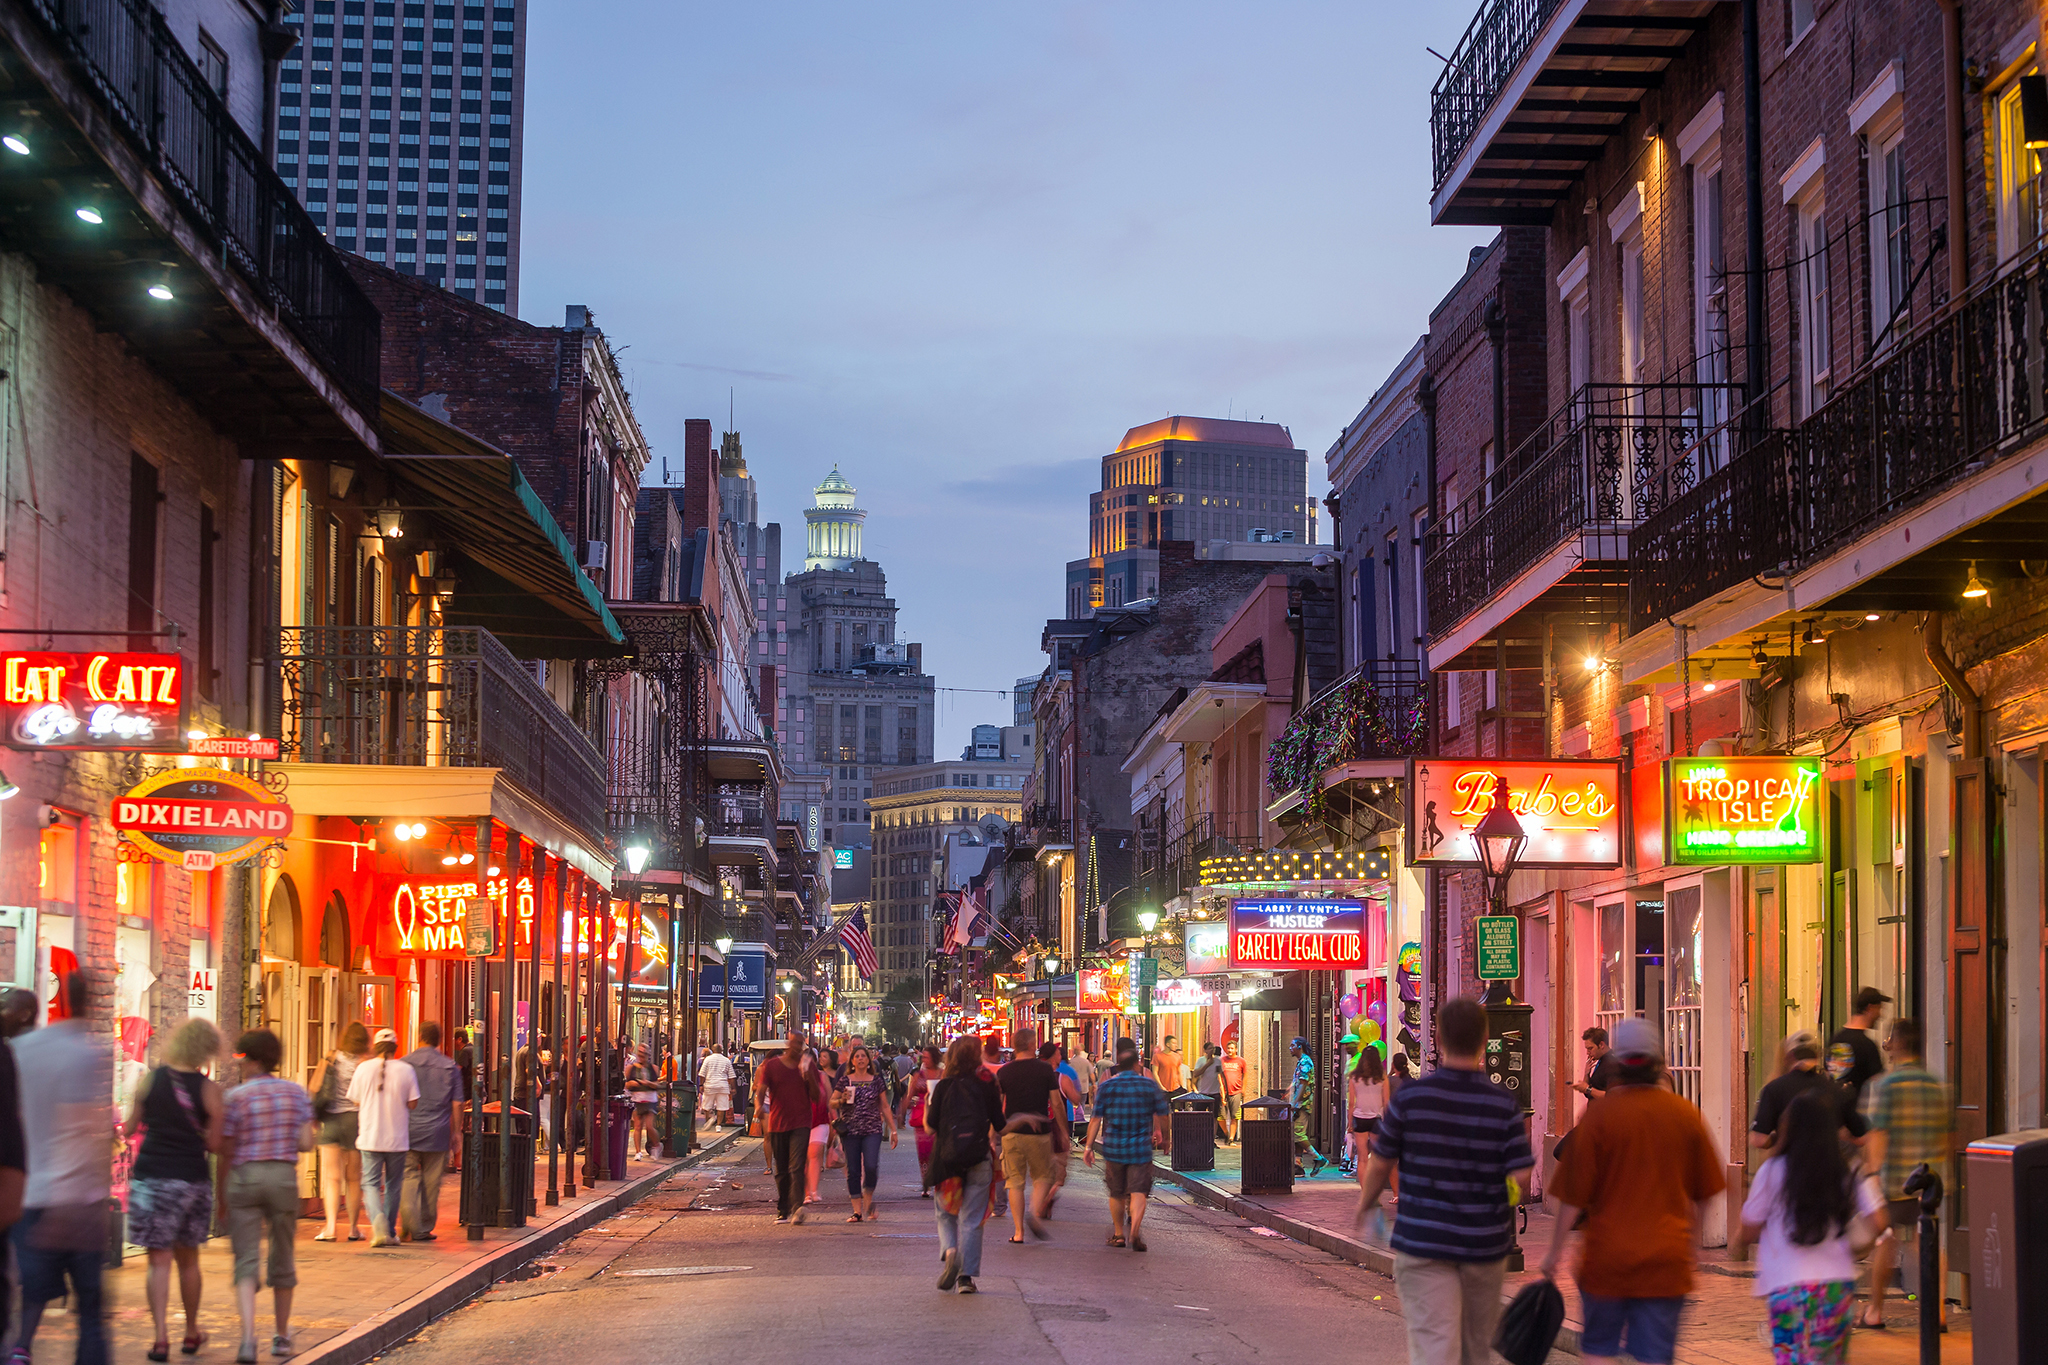 21 Best Things to Do in New Orleans Right Now